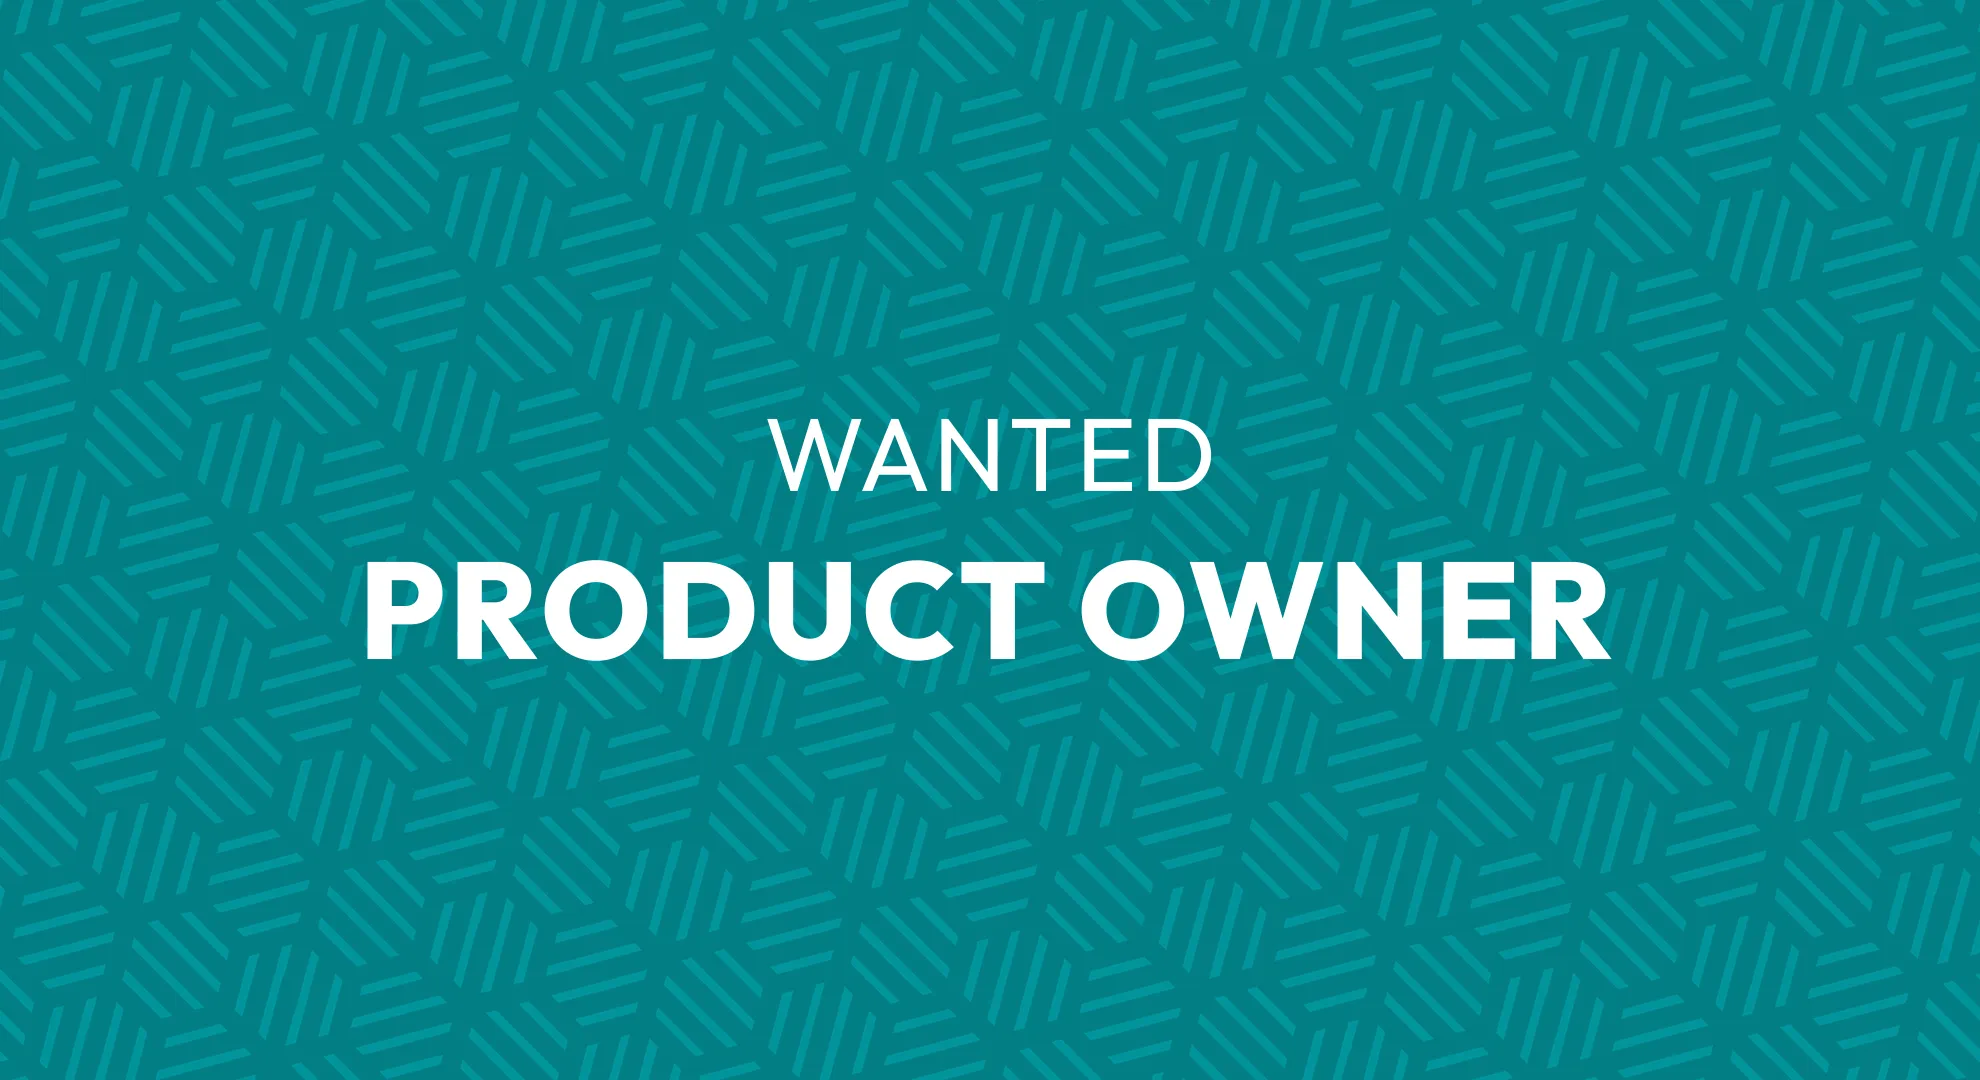 Job Opportunity: Product Owner